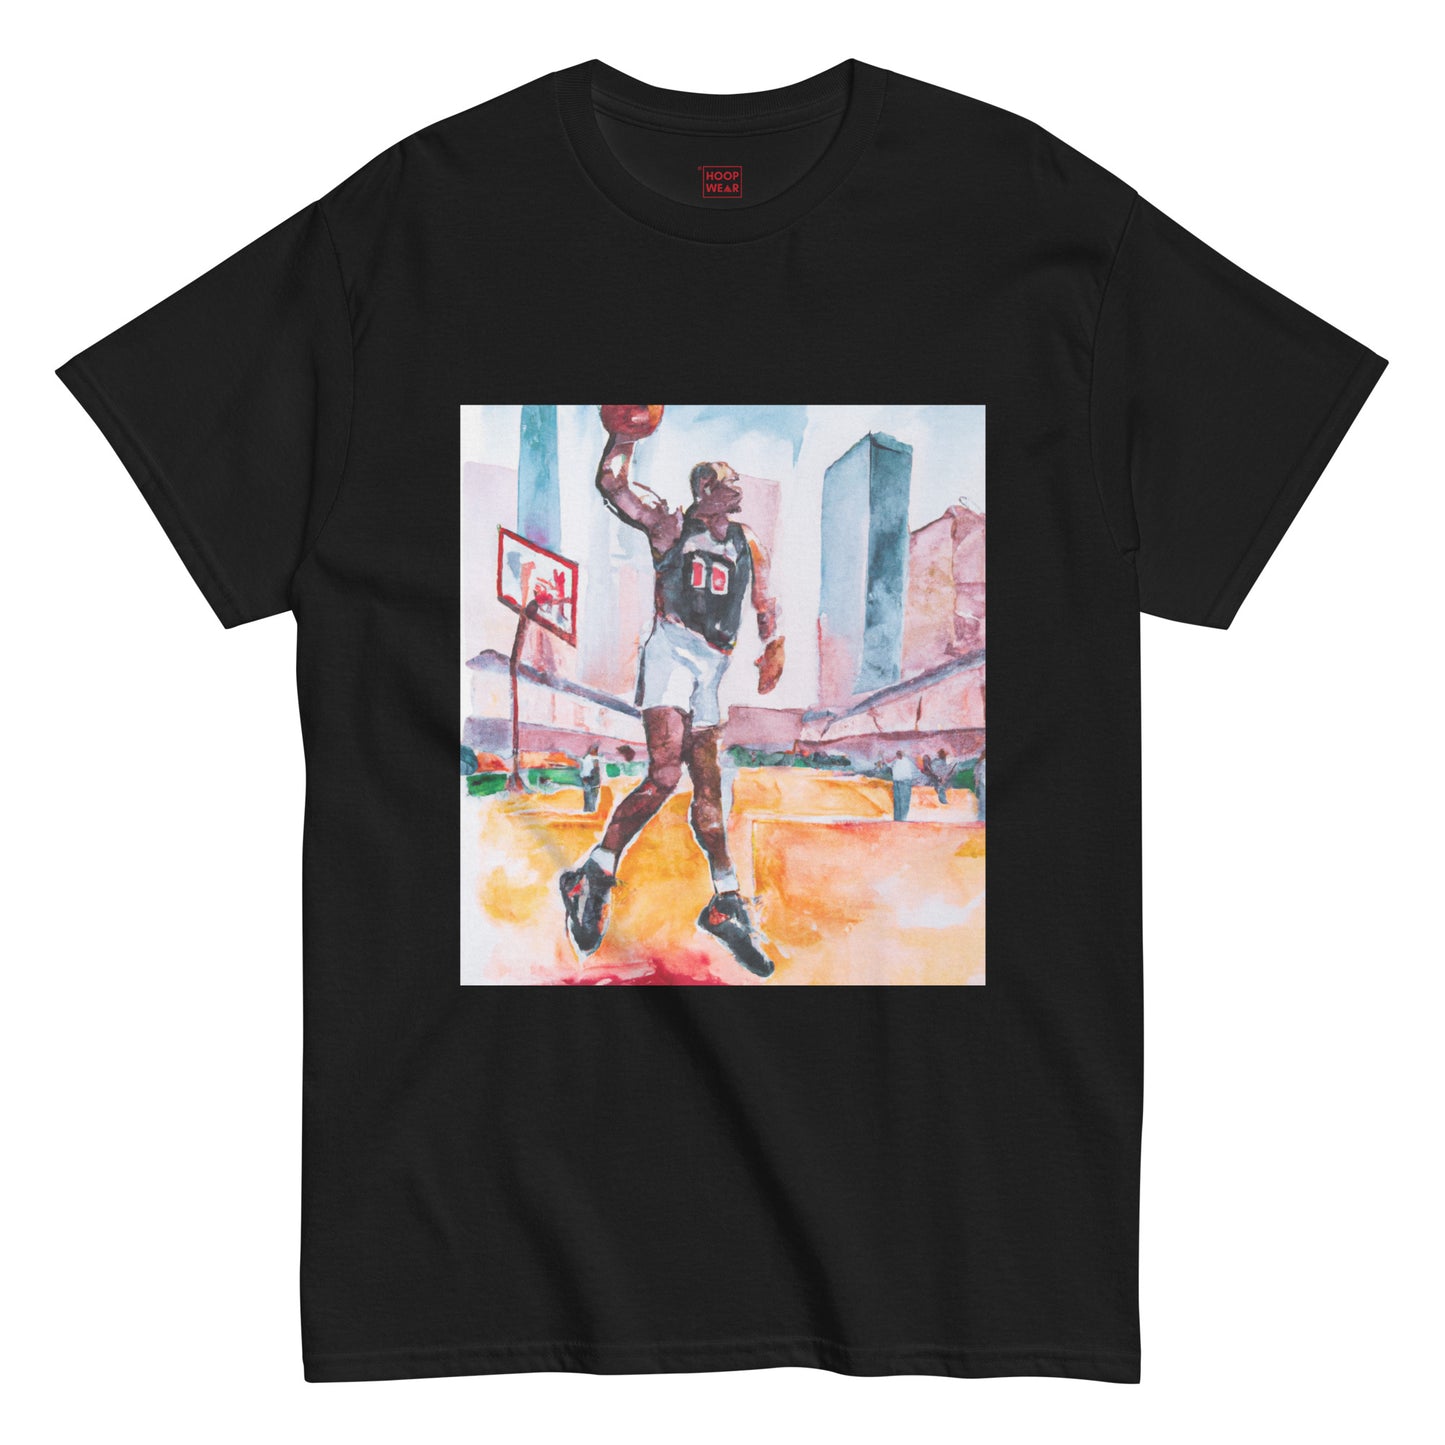 “That's How He Played The Game” T-shirt - Black